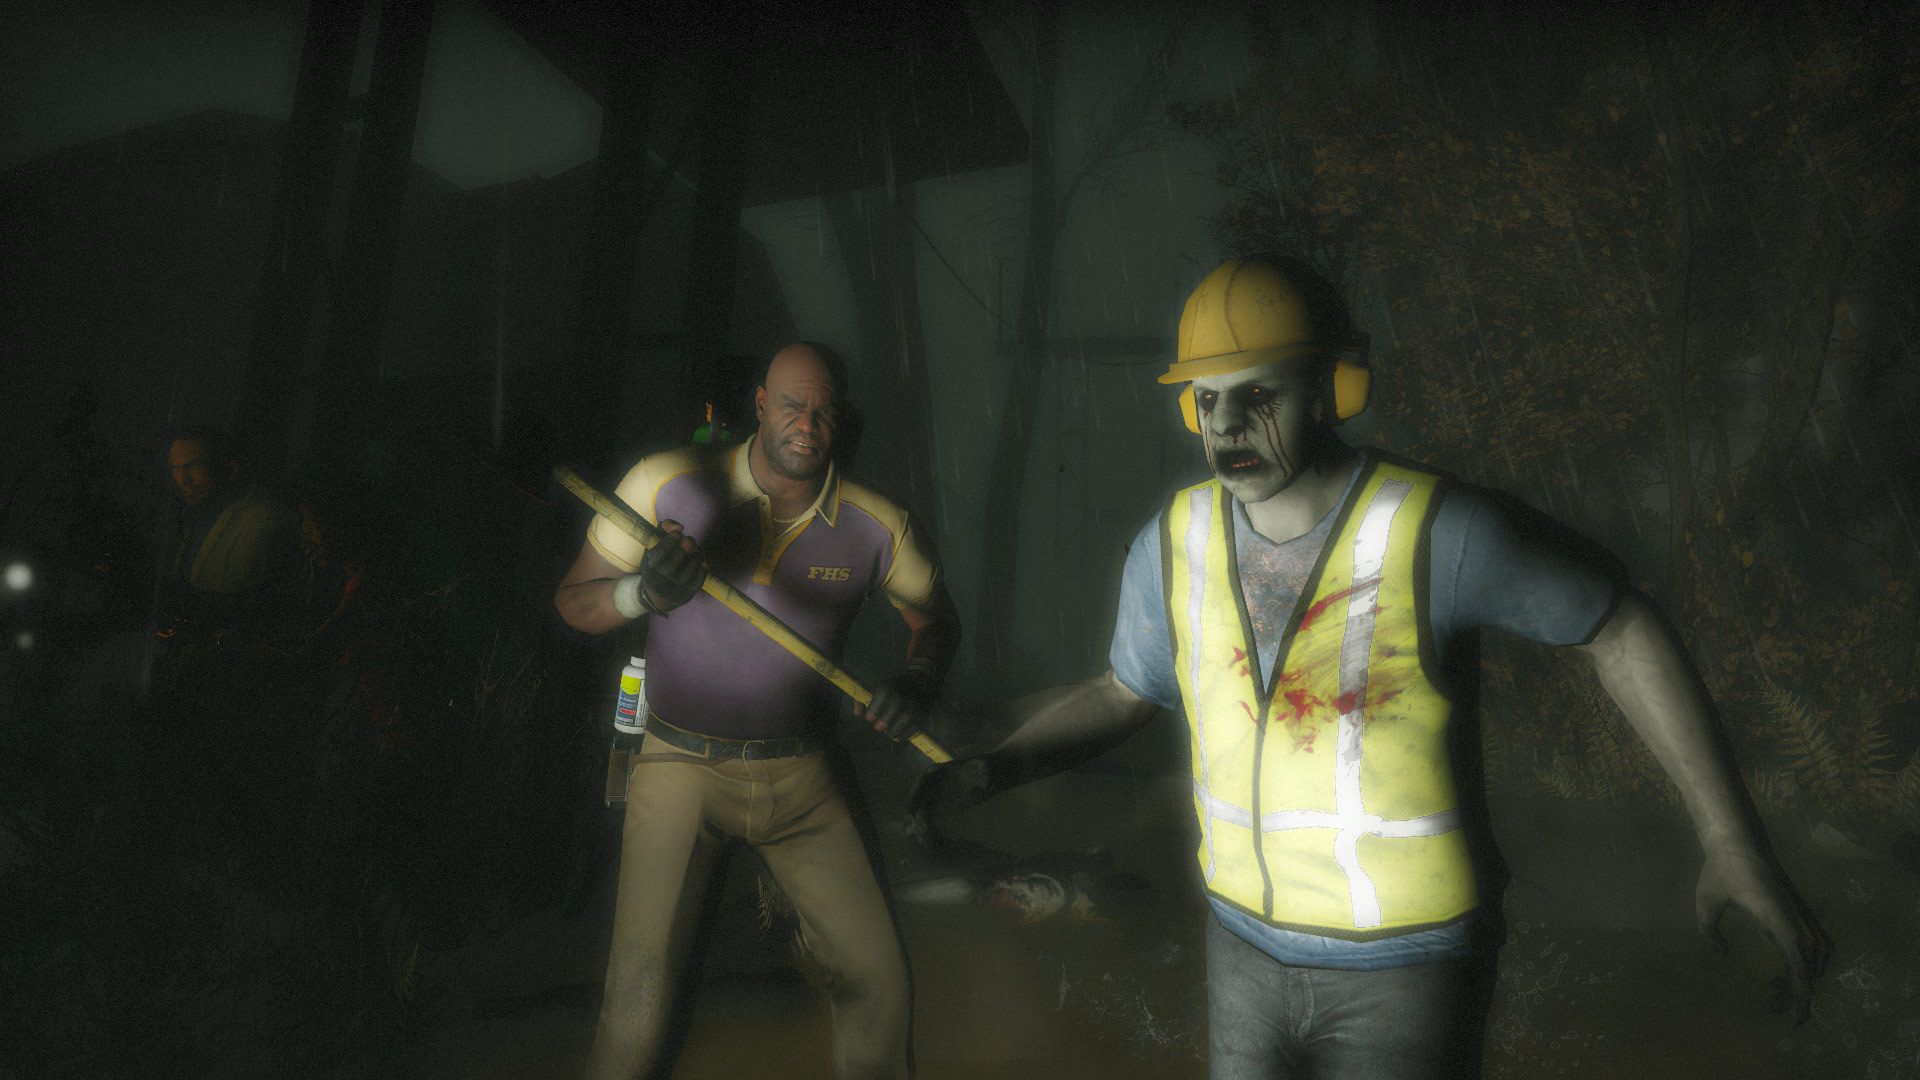 L4D2 attacking zombie with fire axe